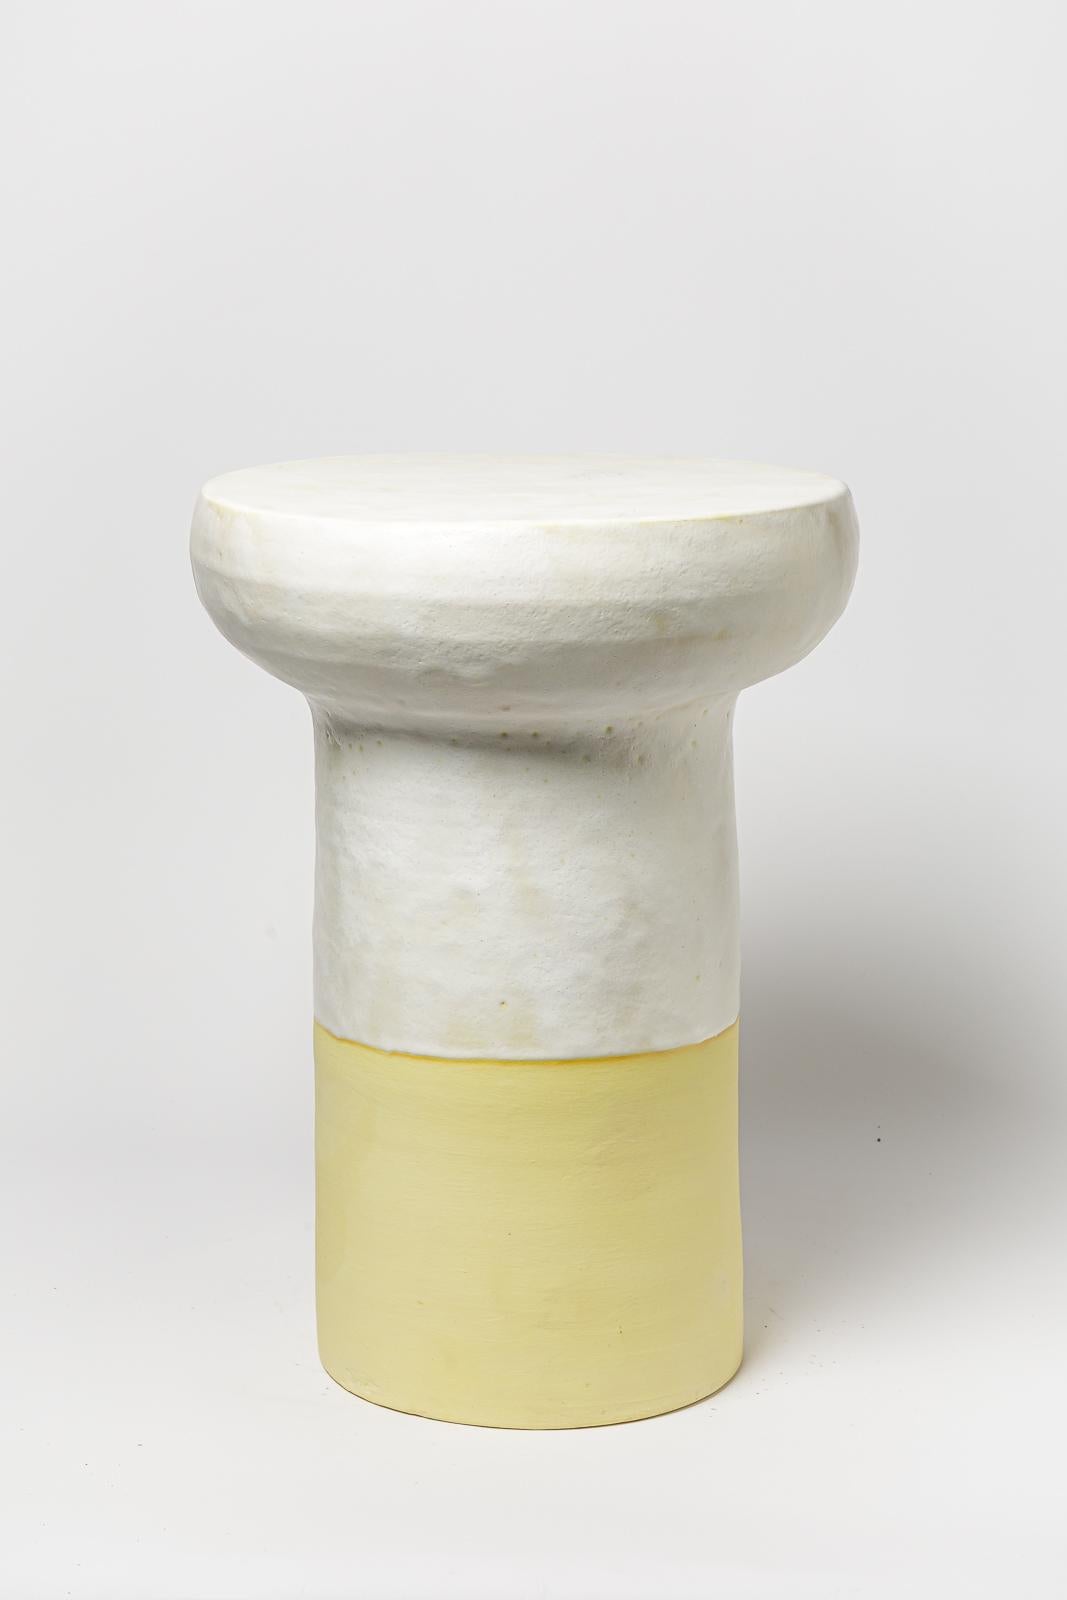 White and yellow glazed ceramic stool or coffee table by Mia Jensen. 
Artist signature under the base. 2023.
H : 21.6’ x 15.3’ inches.